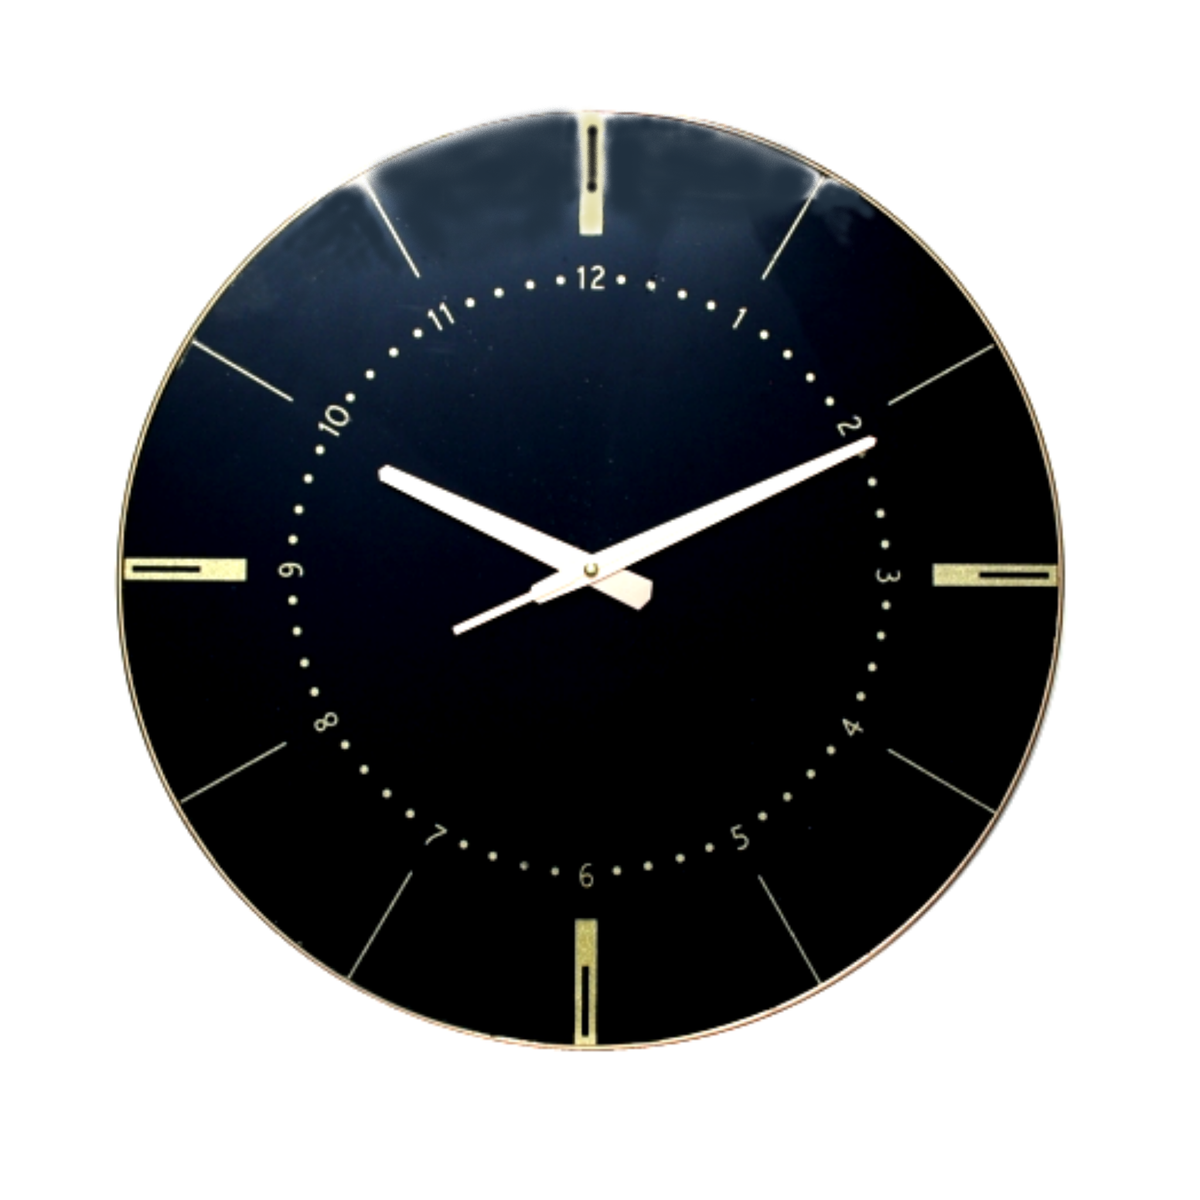 WALL CLOCK BLACK MIRRORED STYLE - CHAMPAGNE GOLD DIALS